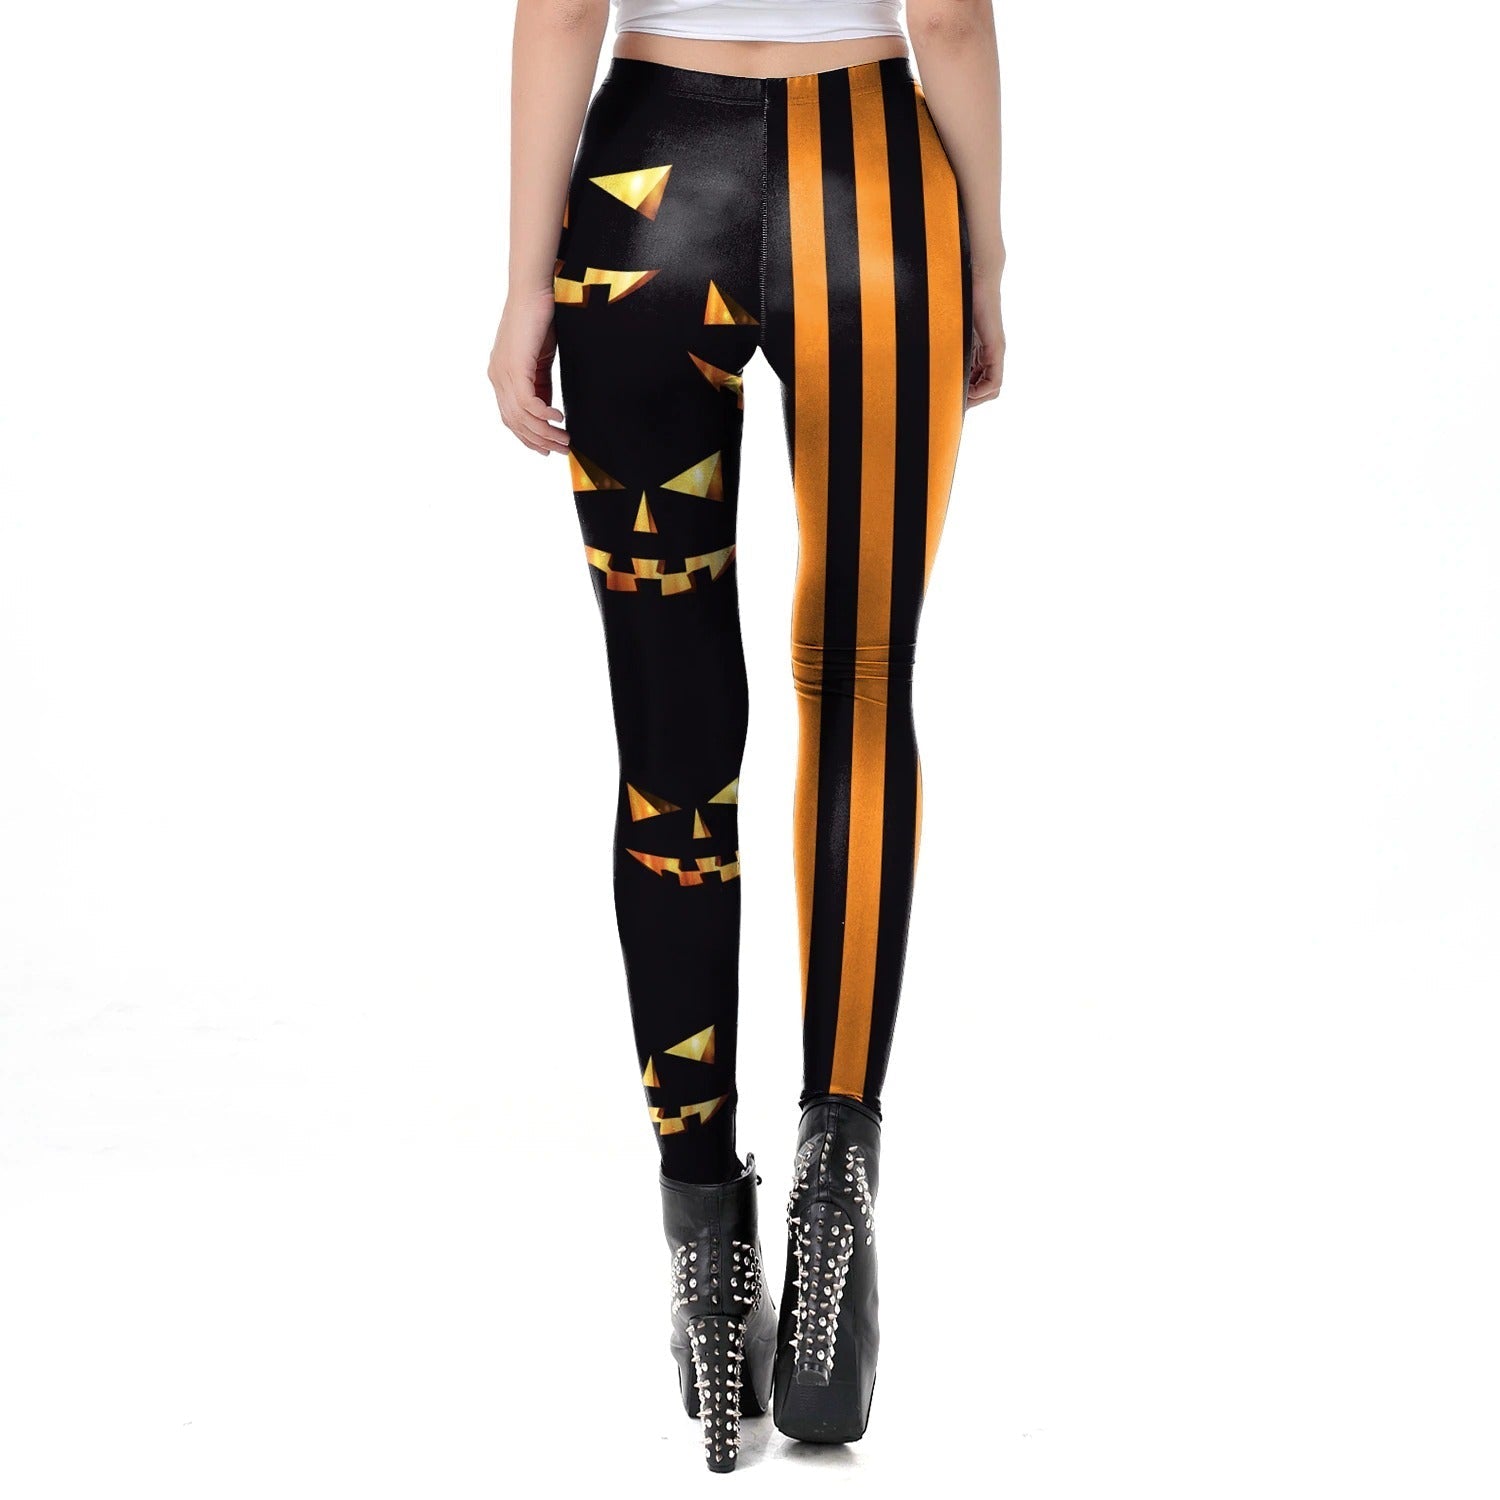 Classic Women Leggings for Halloween / Sexy Workout Pants / Autumn Halloween Clothes for Women #8 - HARD'N'HEAVY